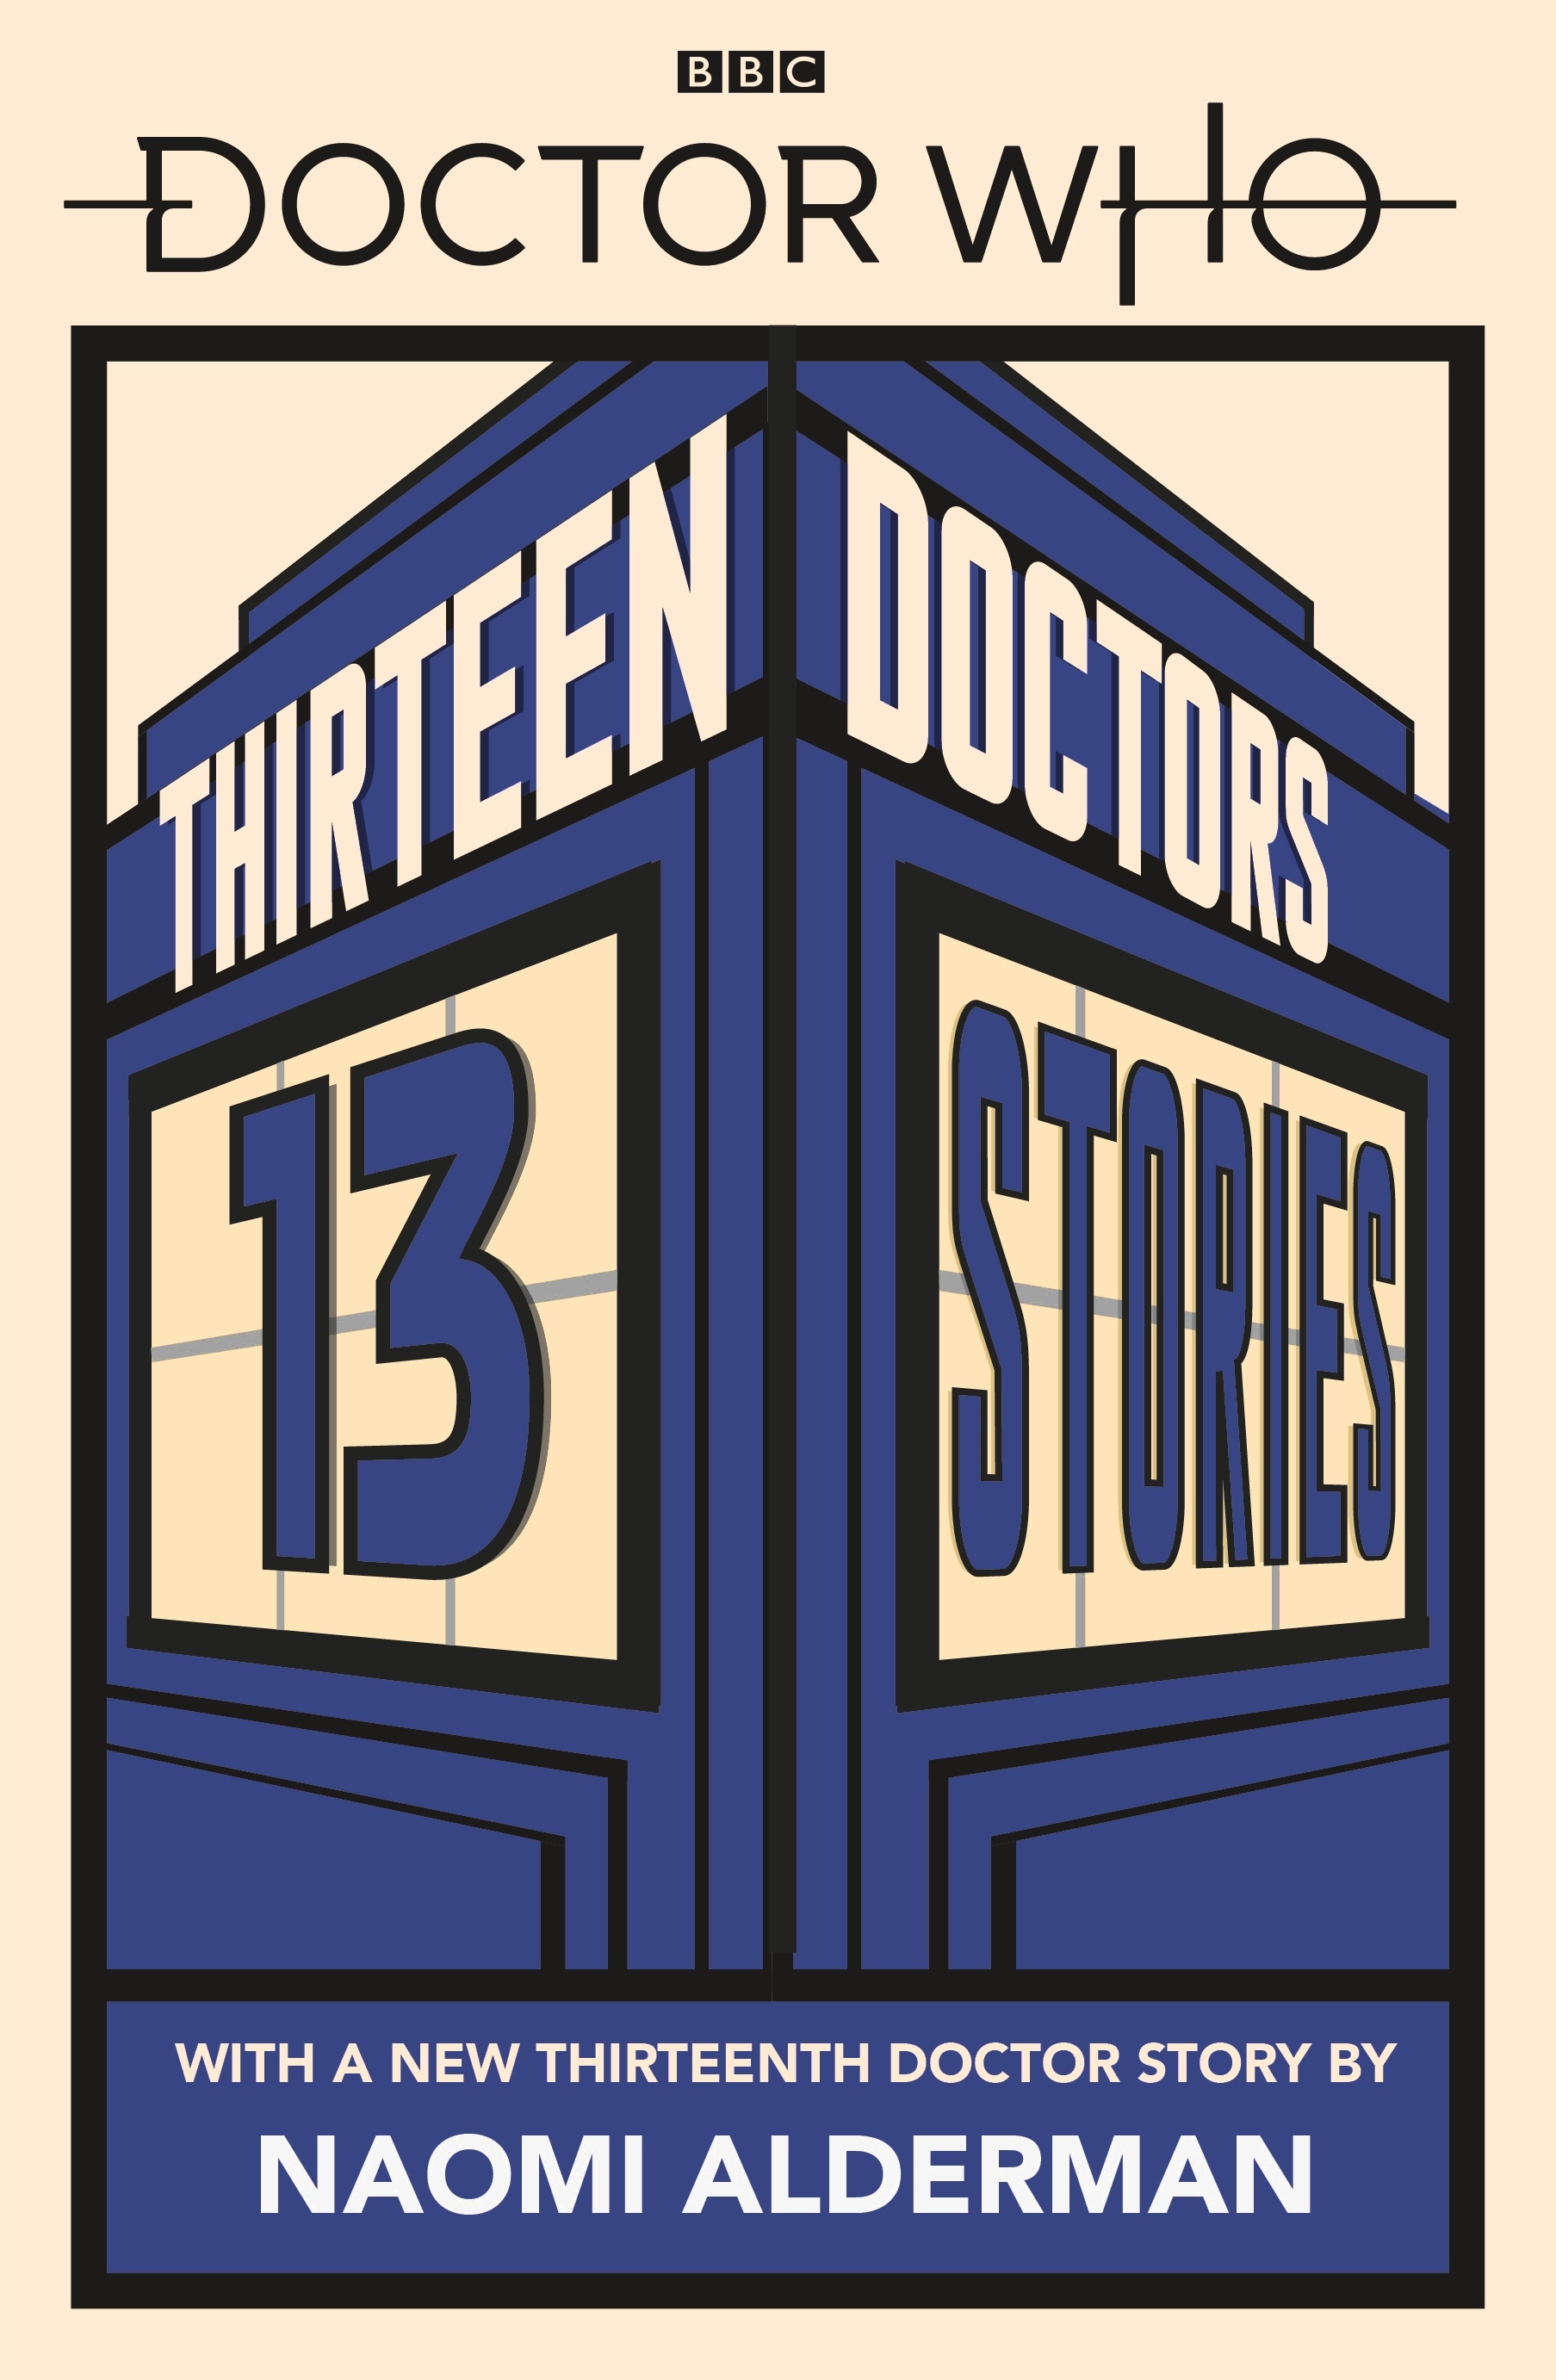 Book “Doctor Who: Thirteen Doctors 13 Stories” by Naomi Alderman — March 7, 2019